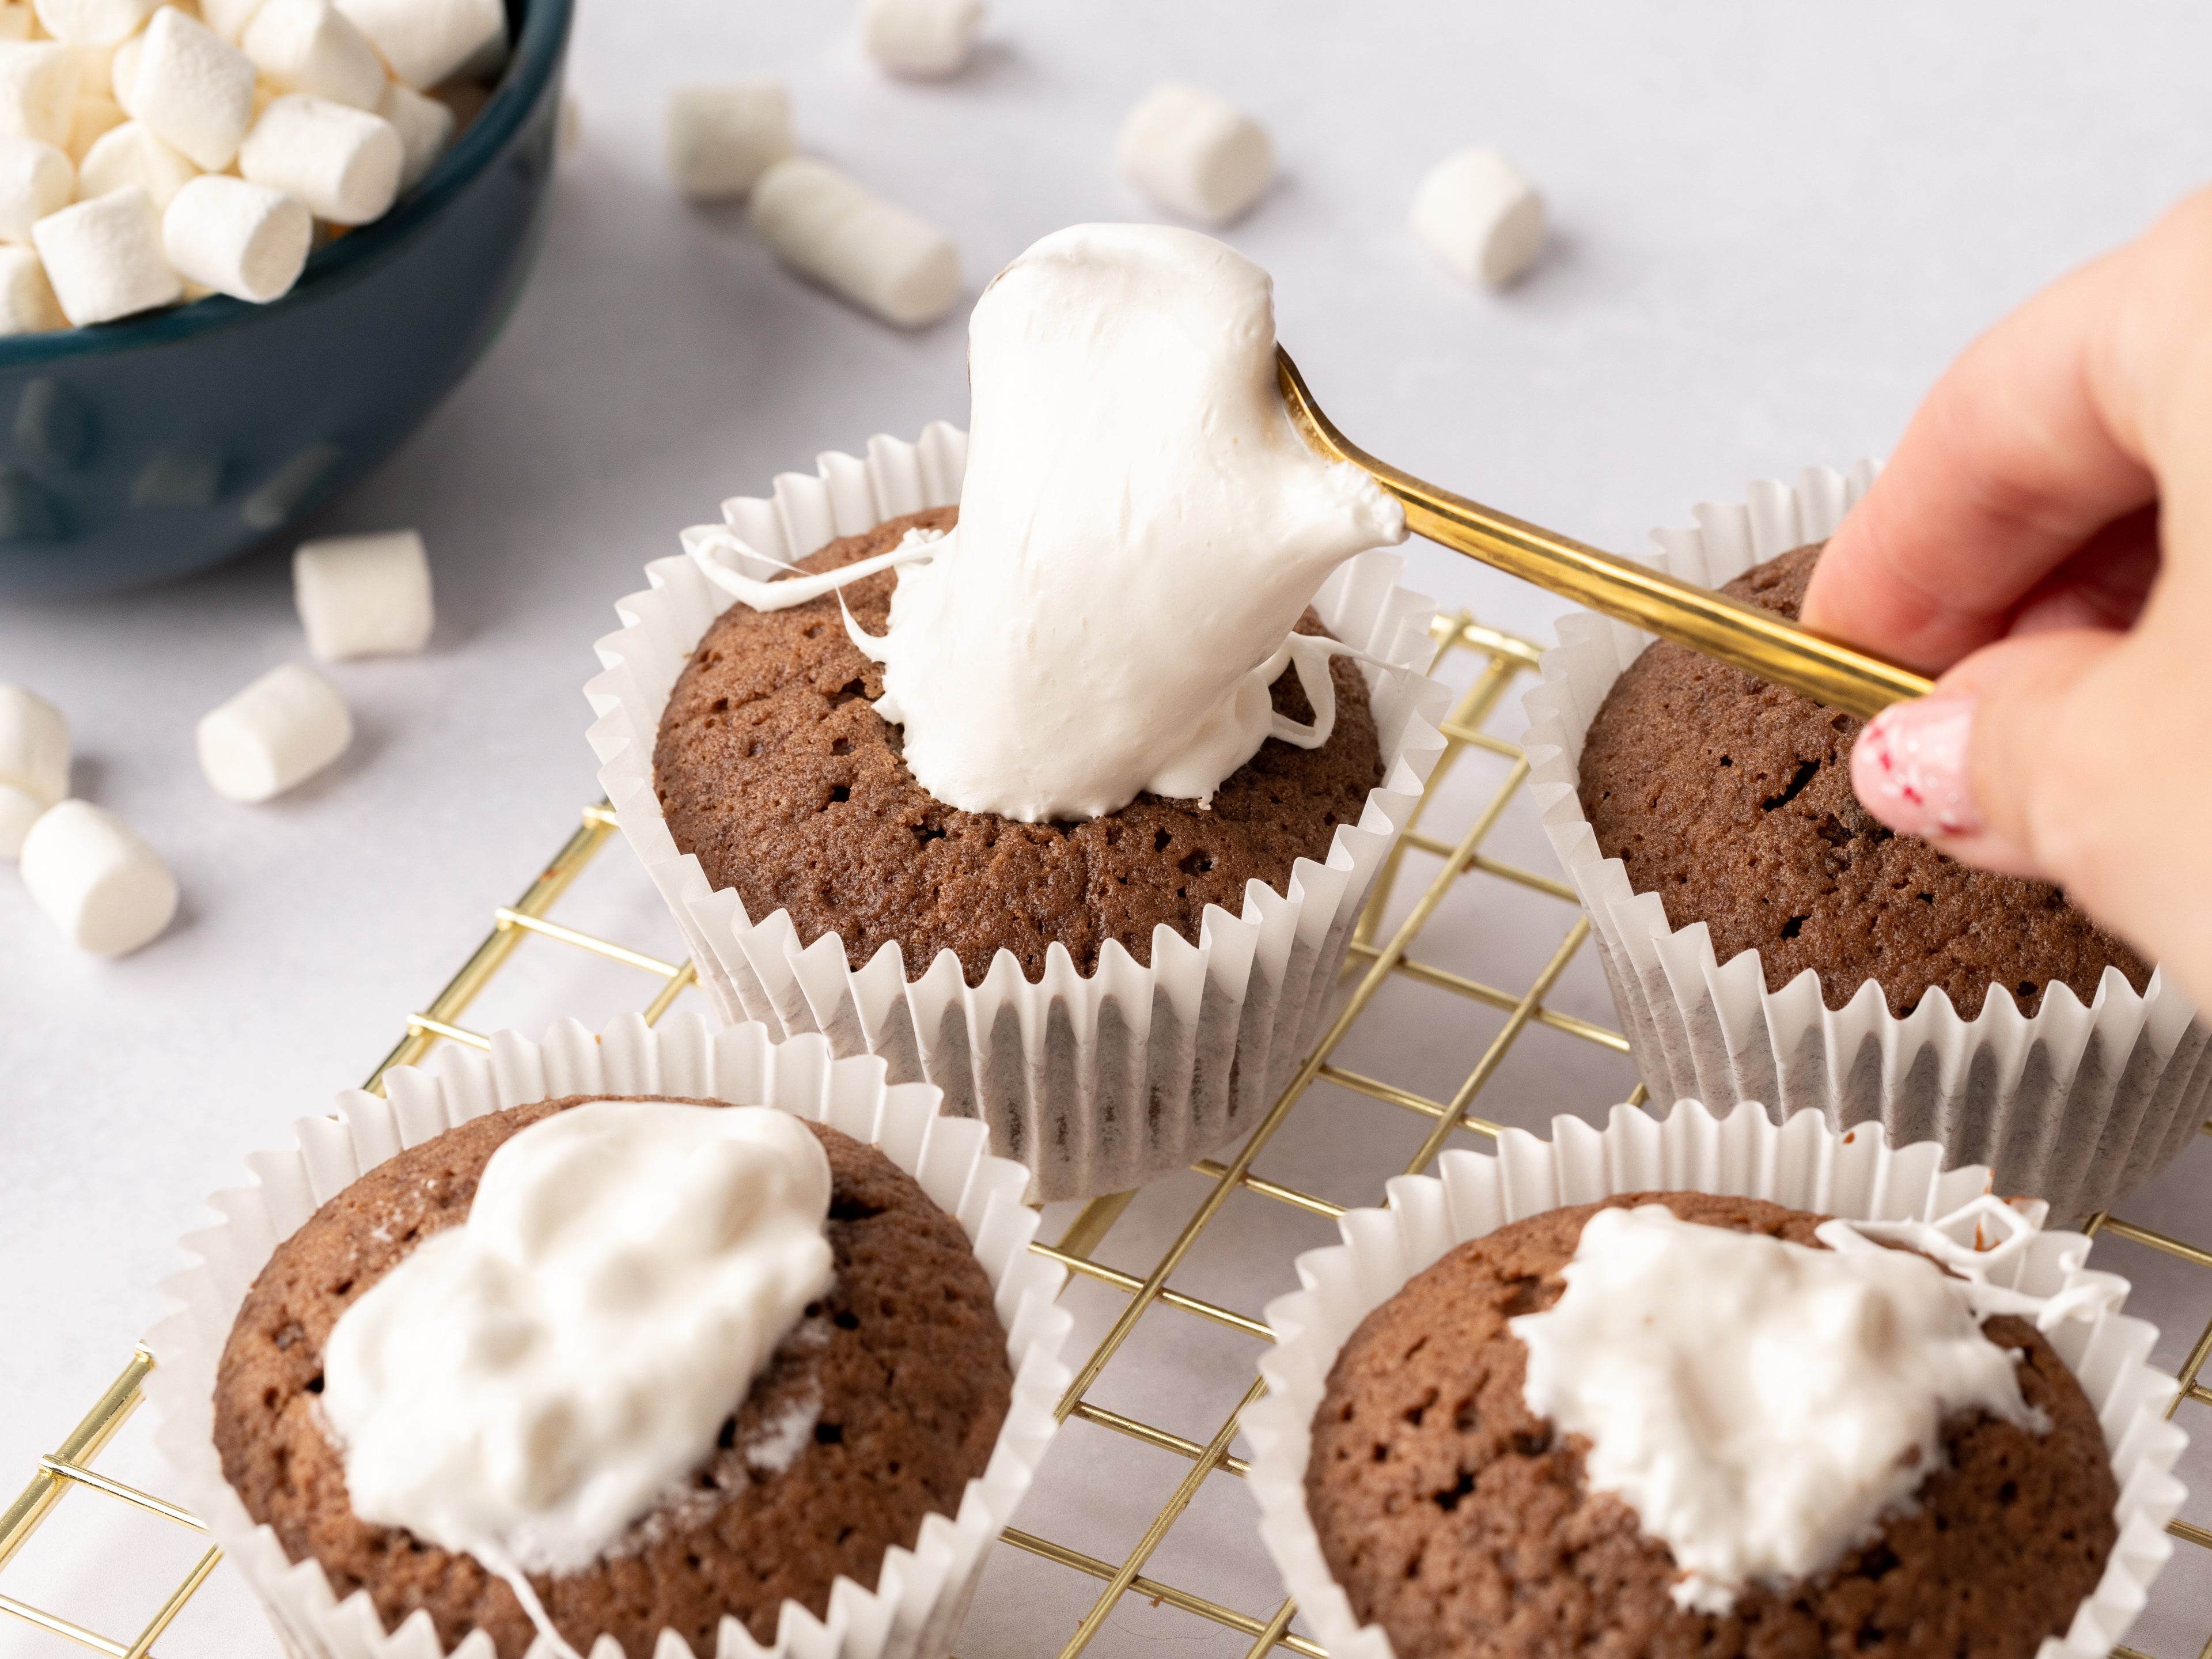 Hand spooning marshmallow into the center of chocolate cupcakes